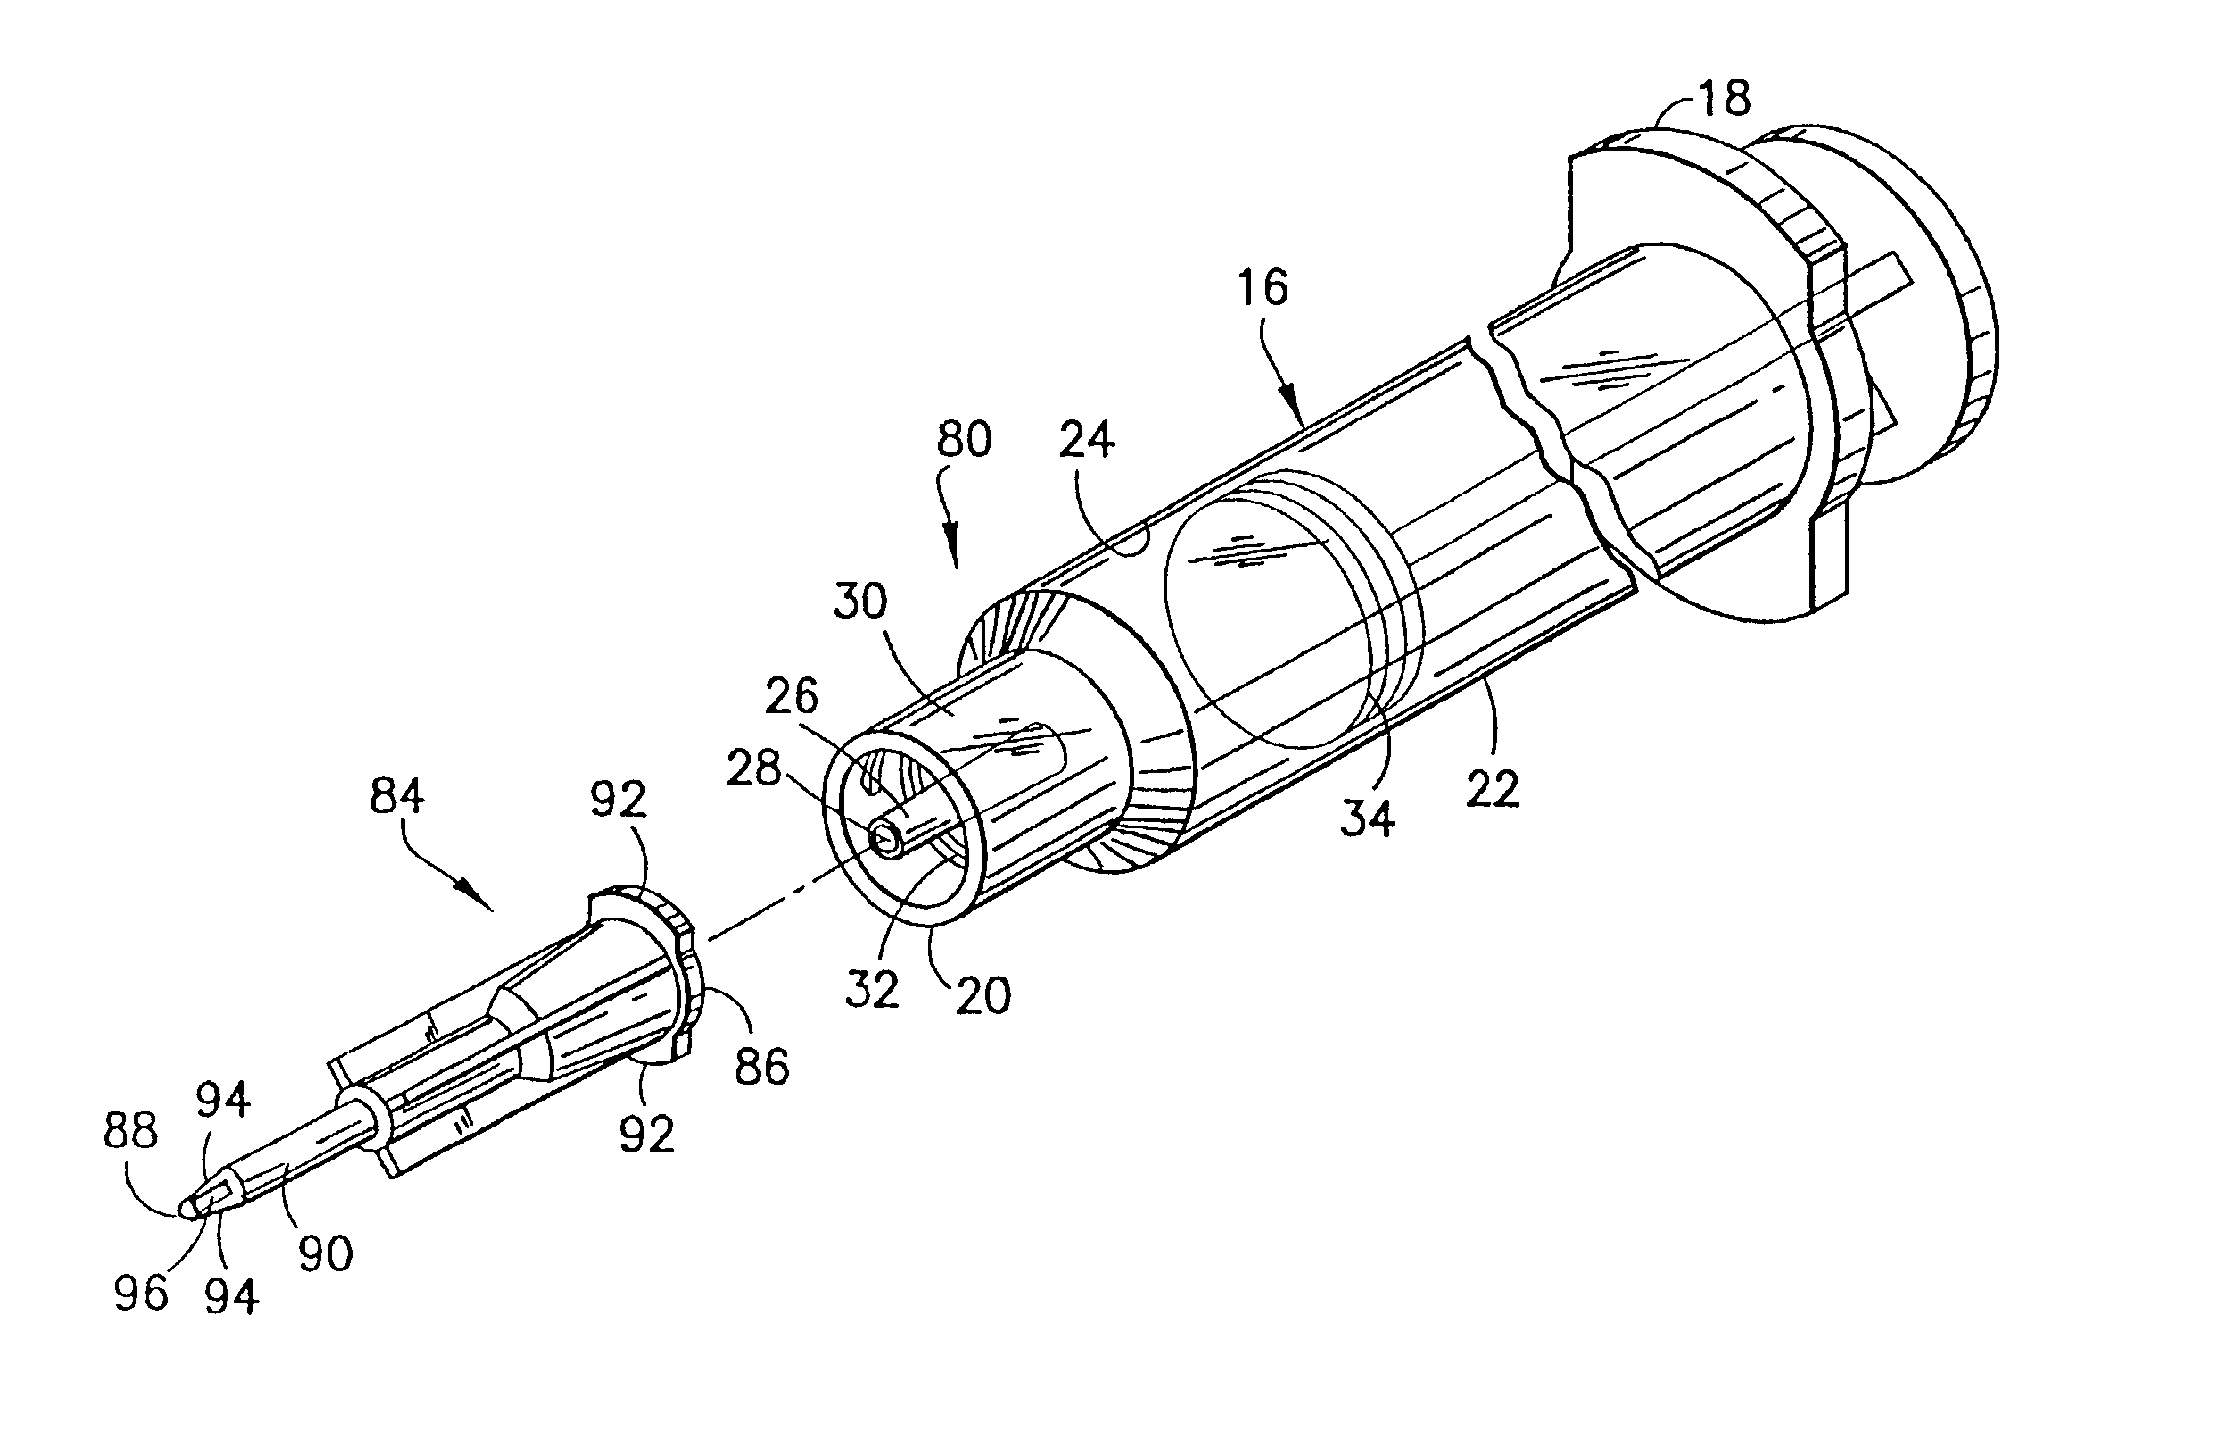 Blunt cannula and filter assembly and method of use with point-of-care testing cartridge